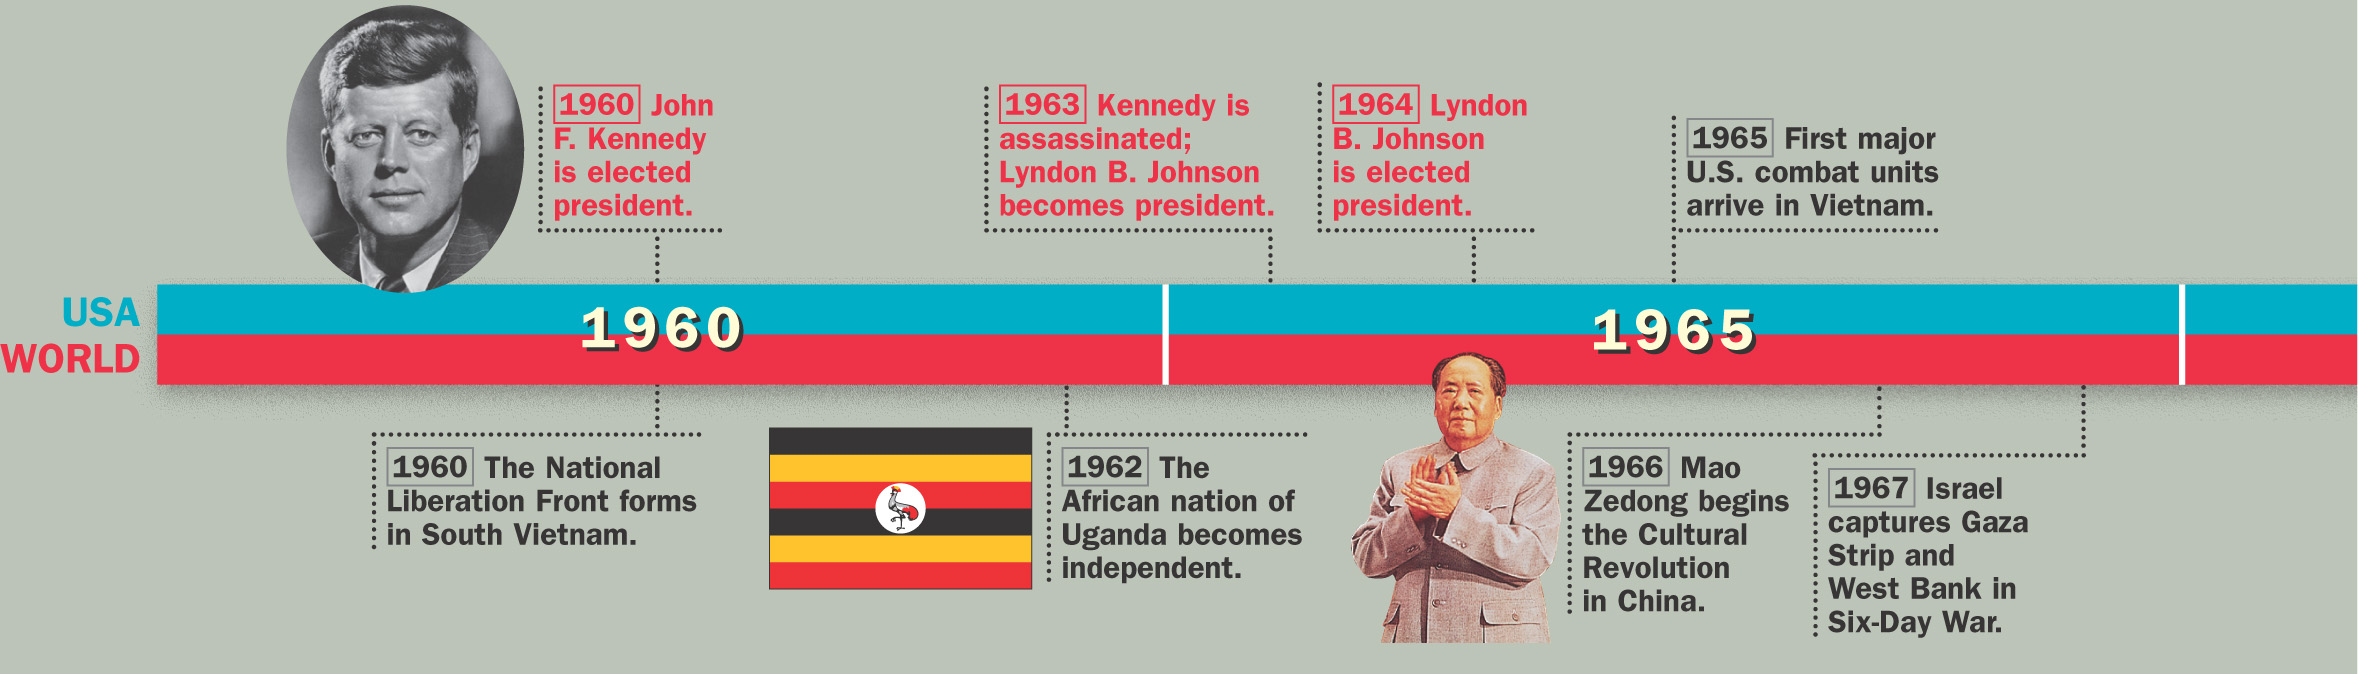 A timeline of historical events from 1960 to 1975 in both the U.S. and the world